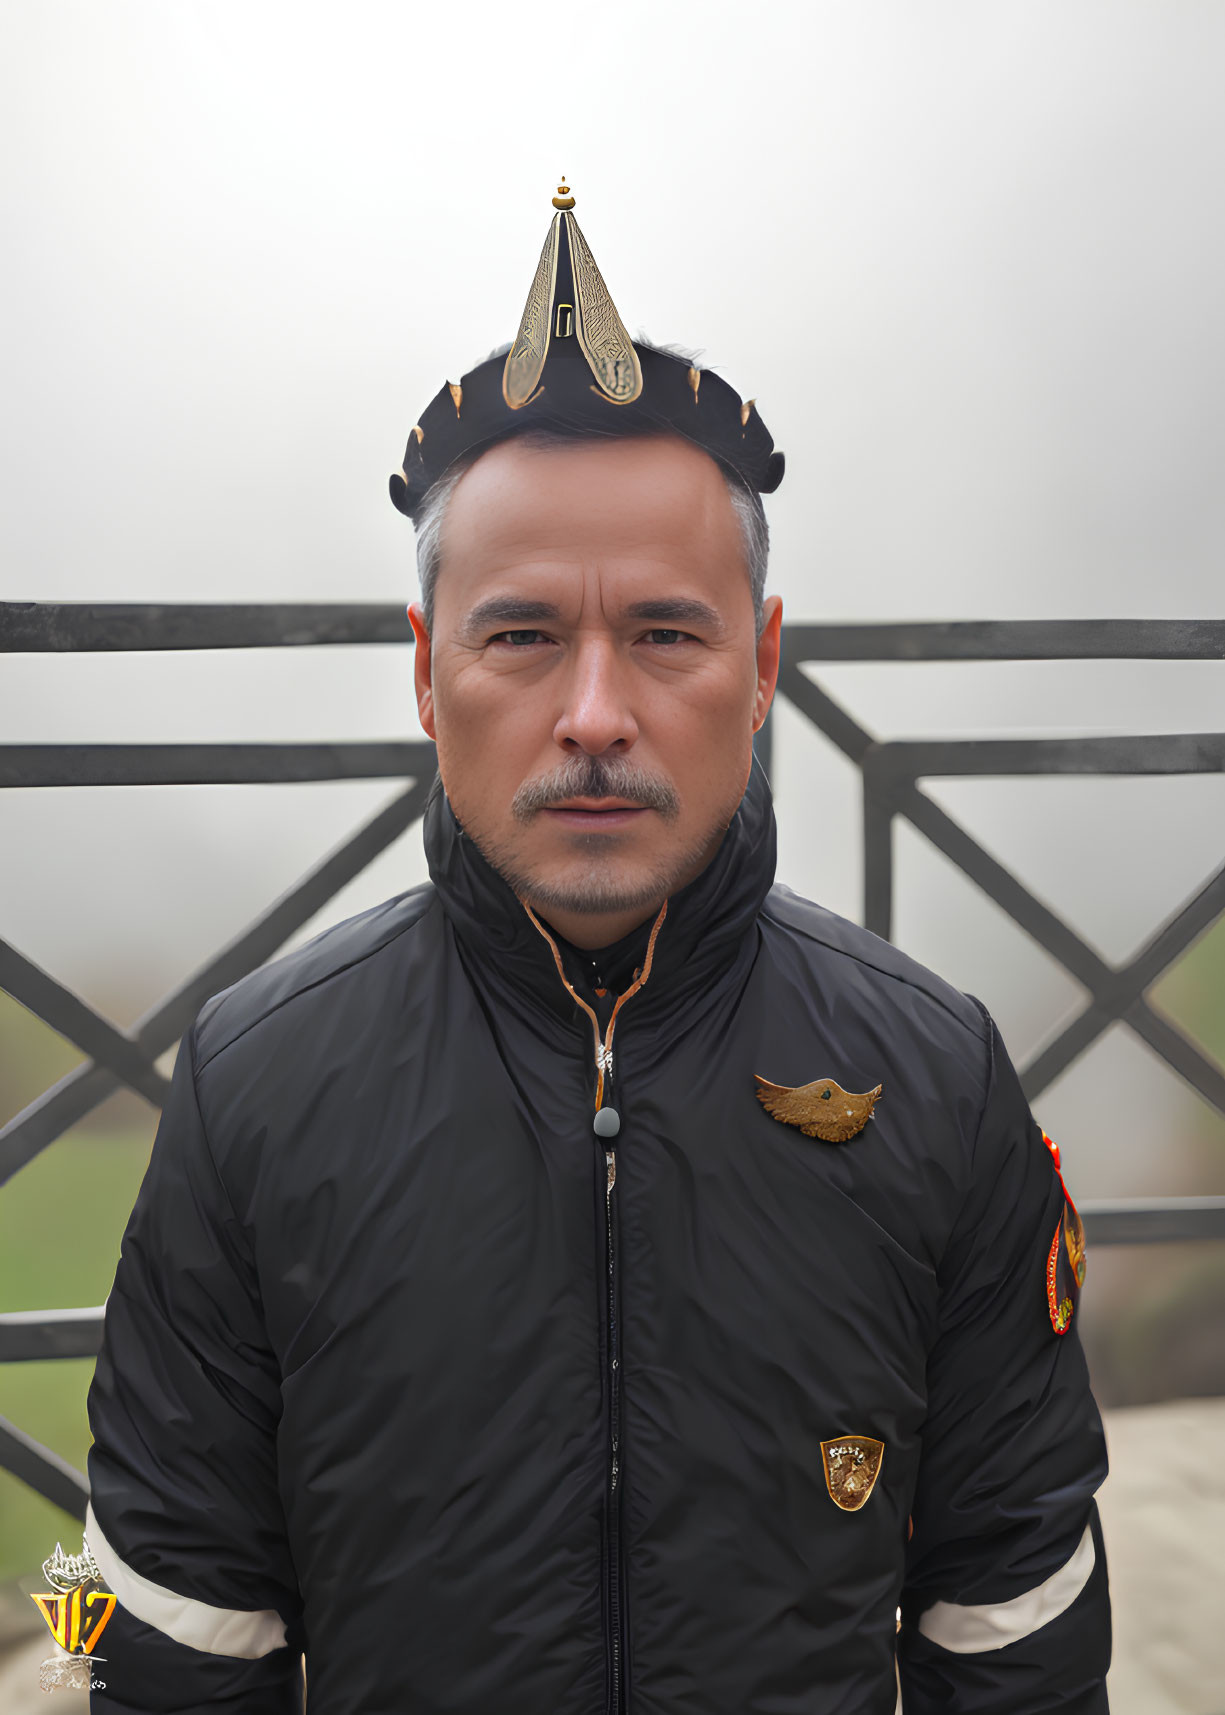 Man in Black Jacket and Traditional Hat with Golden Embellishments Standing in Misty Background